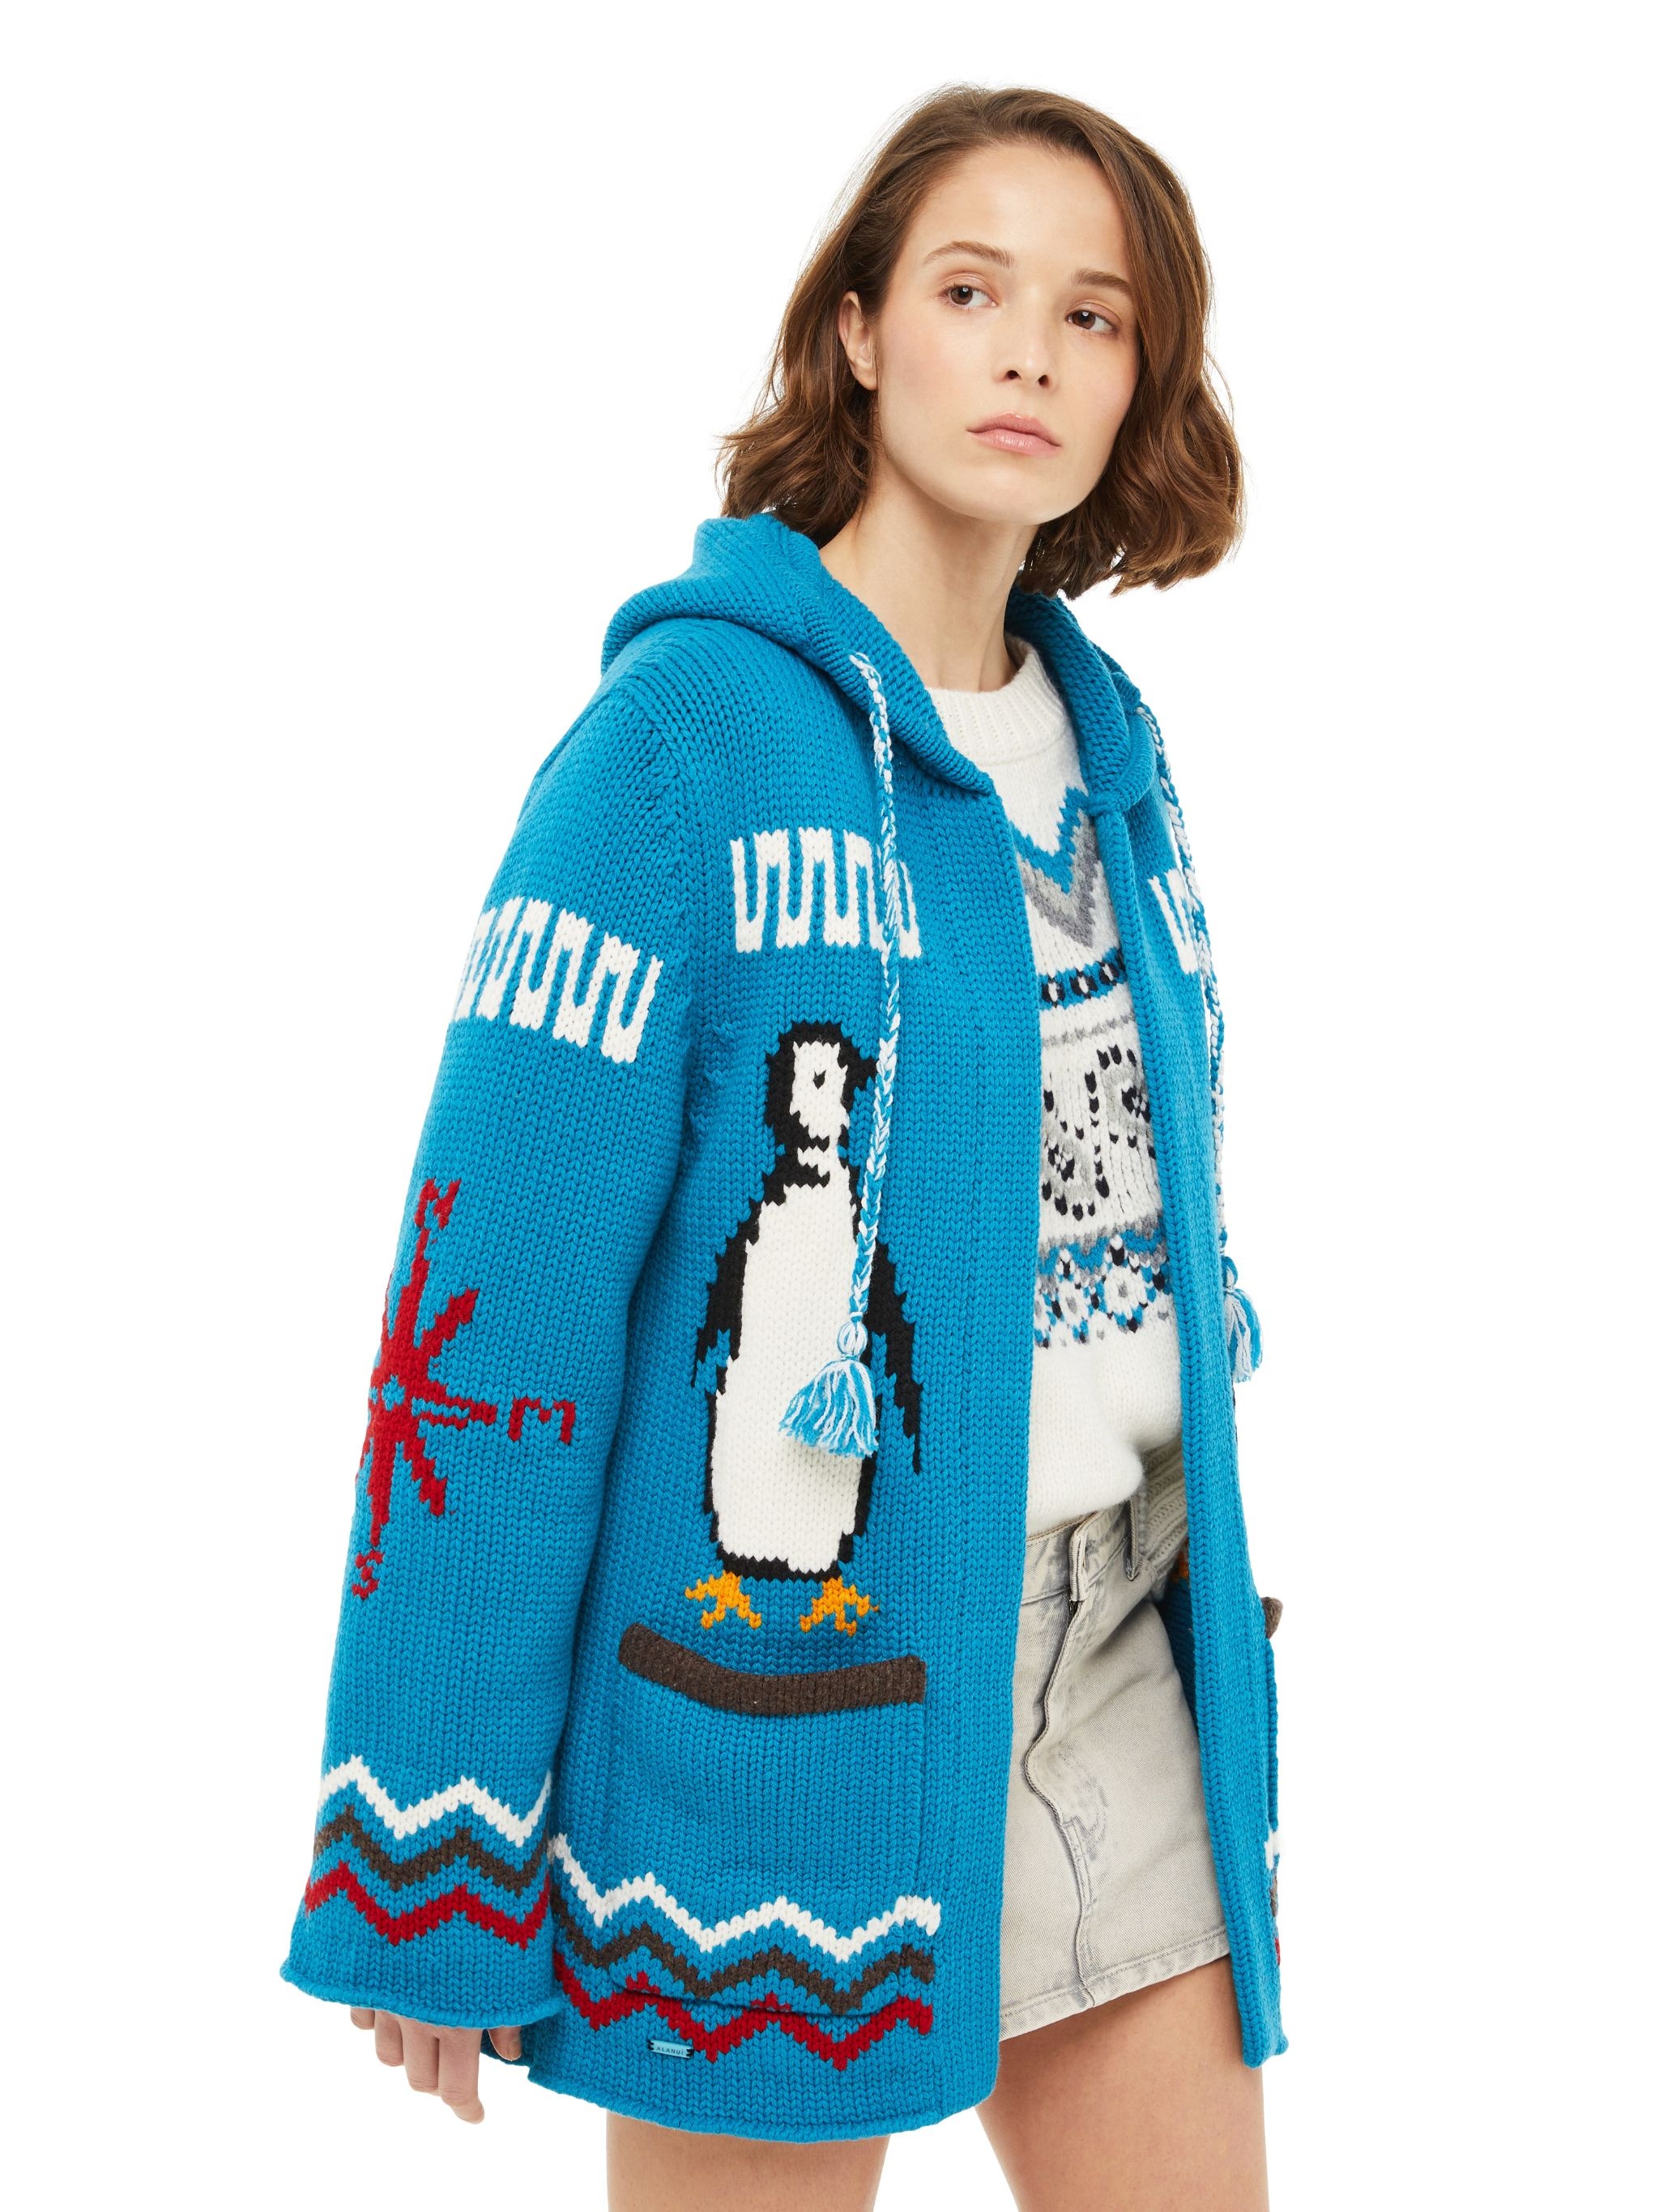 For The Love Of Penguins Hoodie in blue